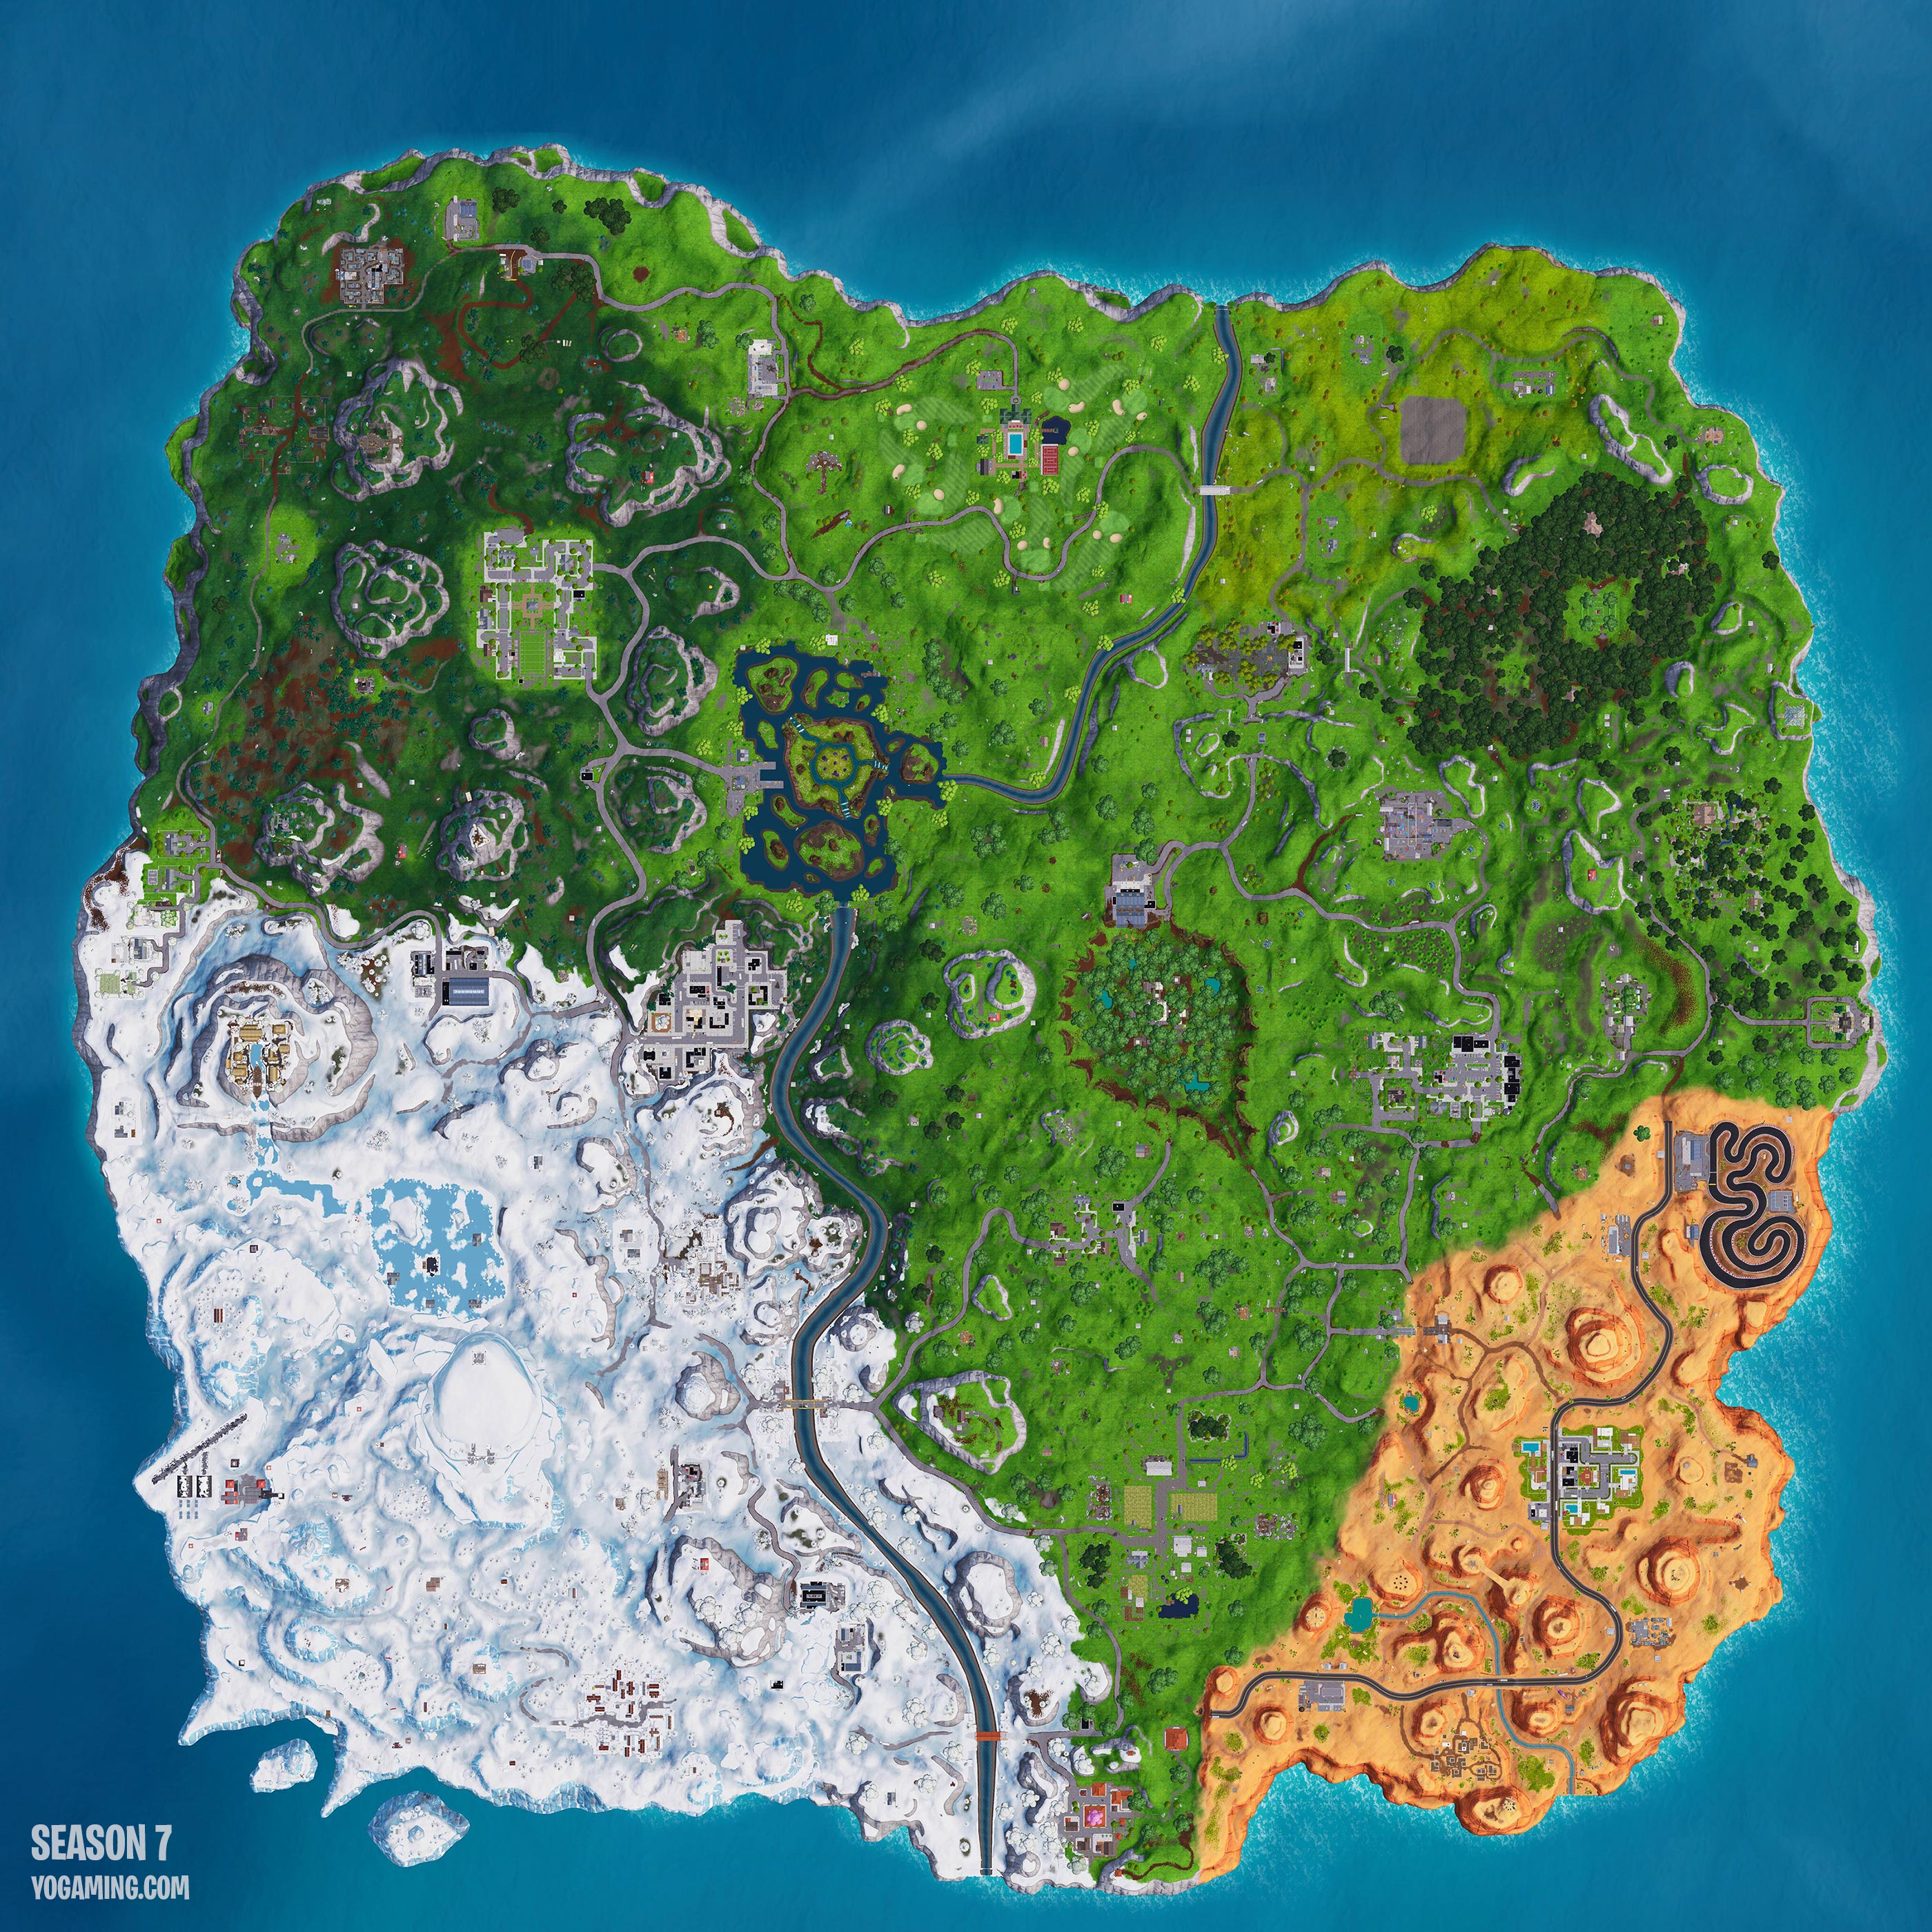 fortnite season 7 map download - when is season 7 fortnite coming out